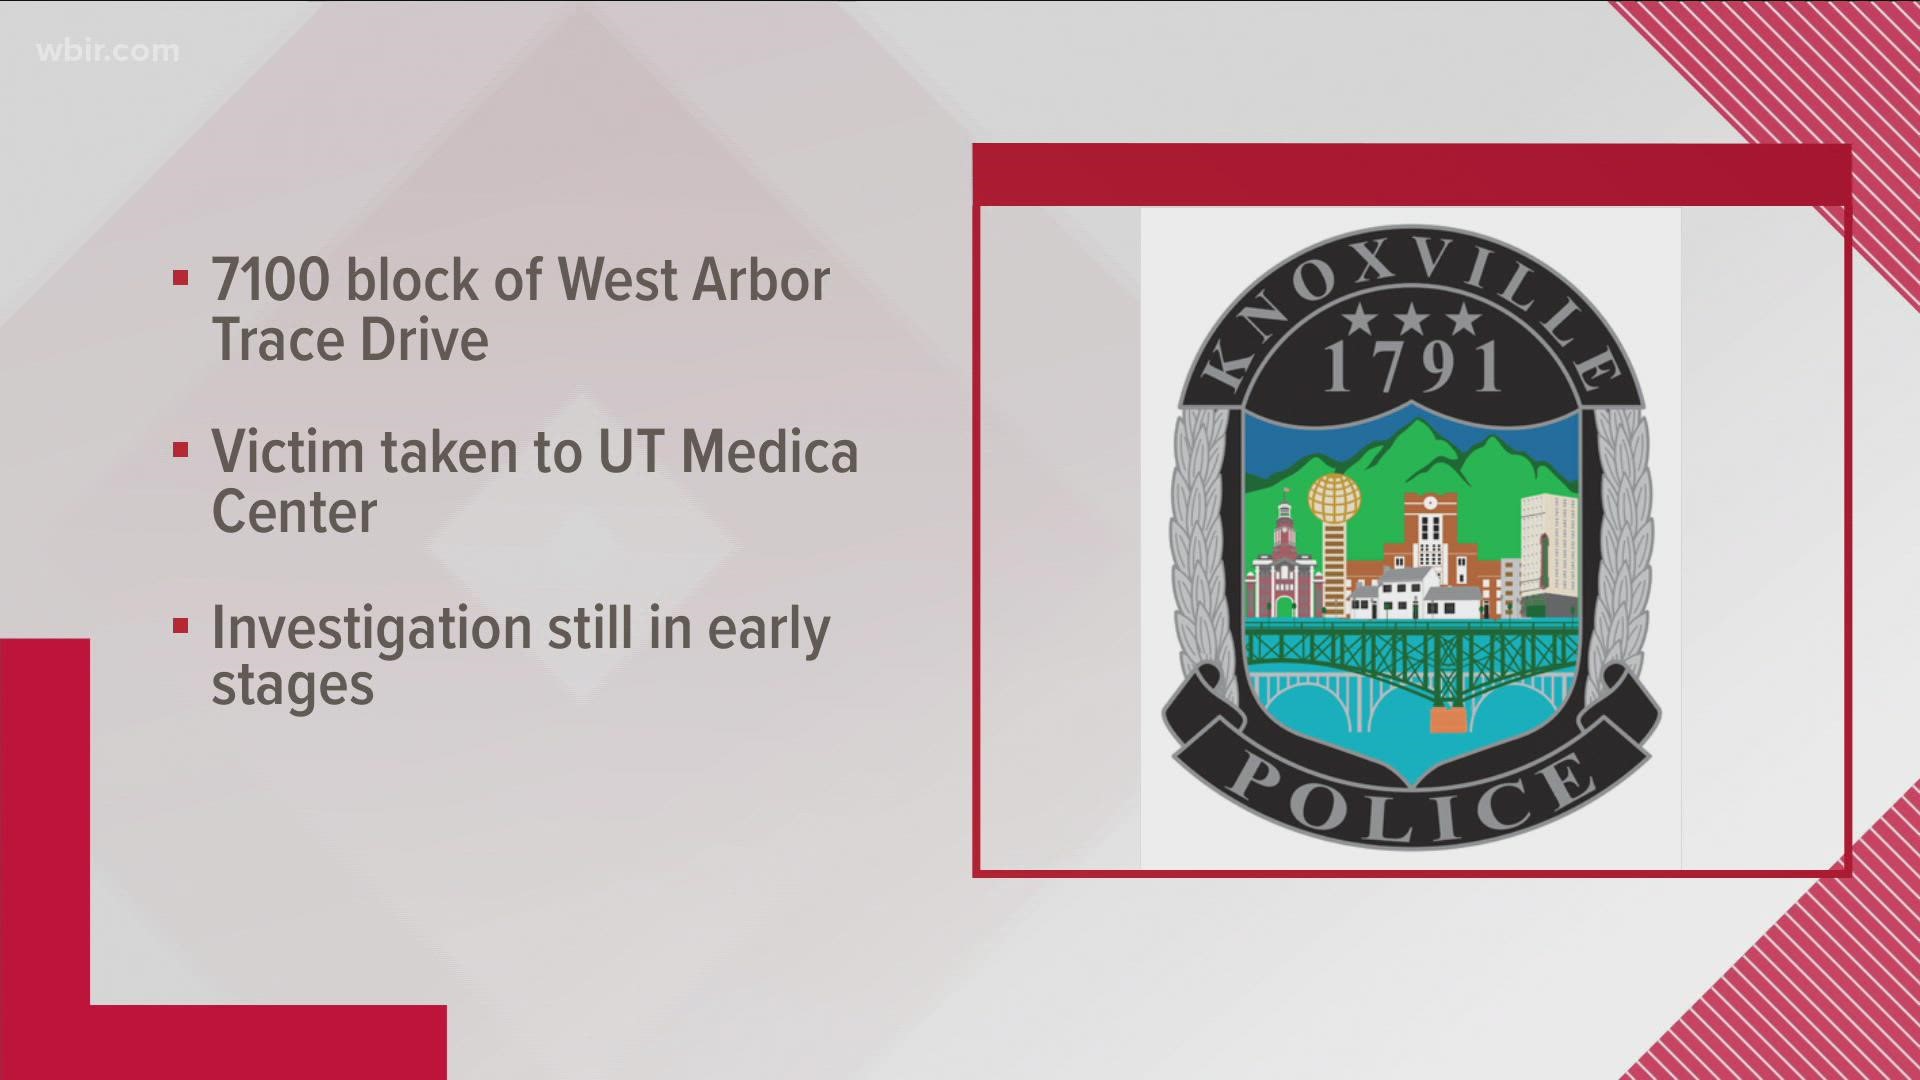 The man is currently recovering from non-life threatening injuries at UT Medical Center.